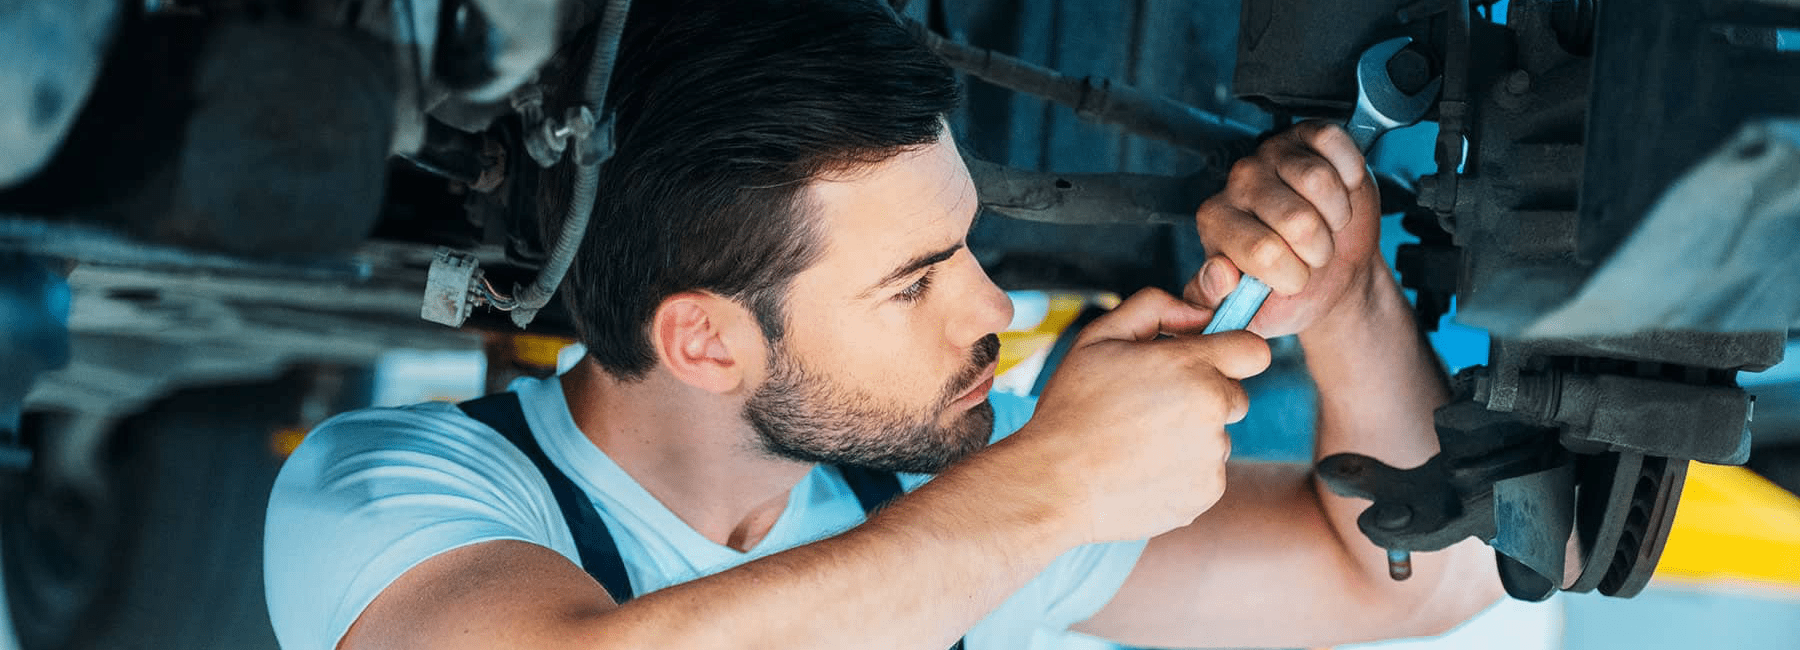 Mechanic Wearing Gloves with Tools working on engine